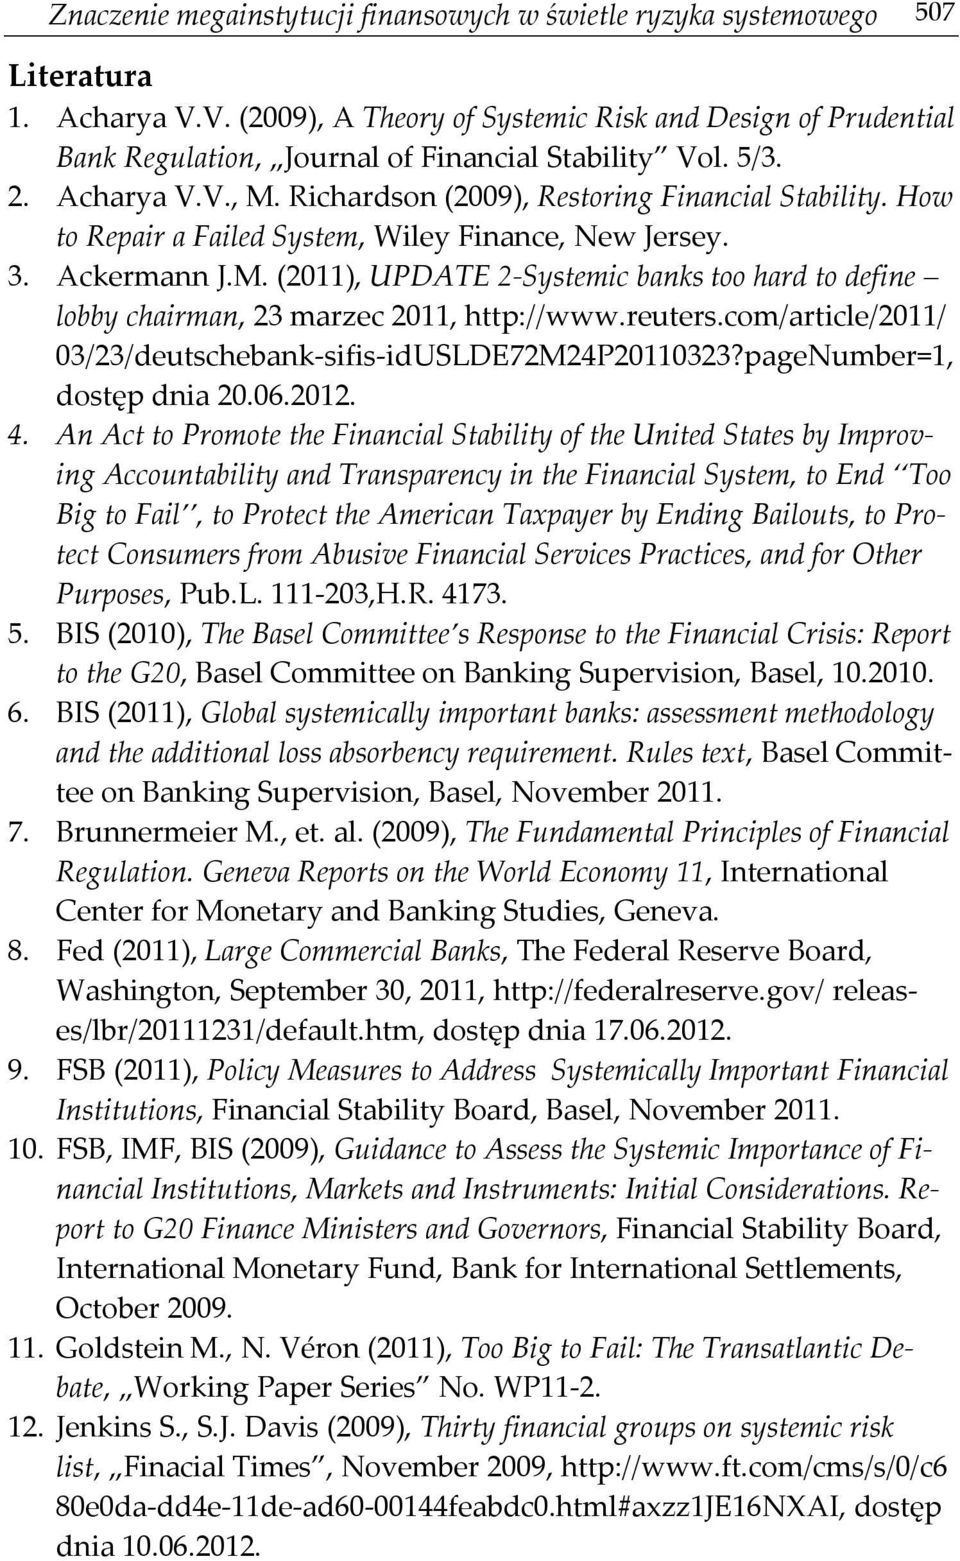 How to Repair a Failed System, Wiley Finance, New Jersey. 3. Ackermann J.M. (2011), UPDATE 2-Systemic banks too hard to define lobby chairman, 23 marzec 2011, http://www.reuters.